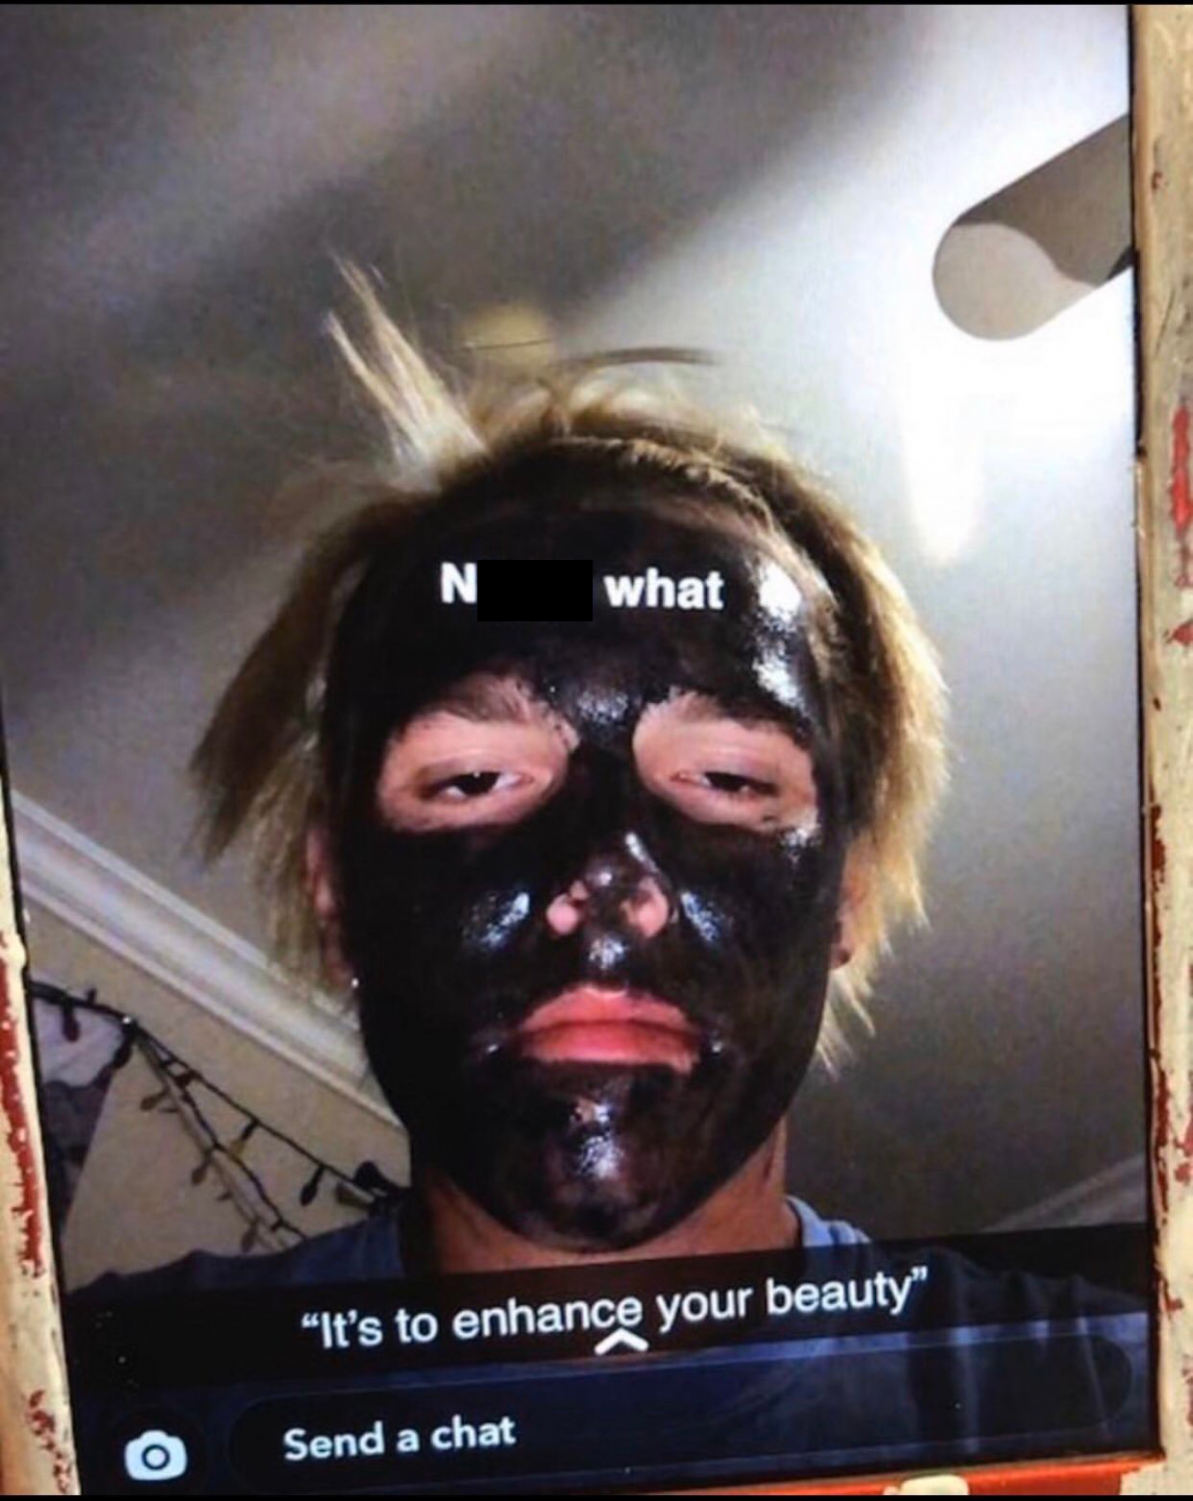 Georgia+Southern+hasn%E2%80%99t+denied+admission+to+incoming+student+even+after+images+of+him+in+blackface+surfaced